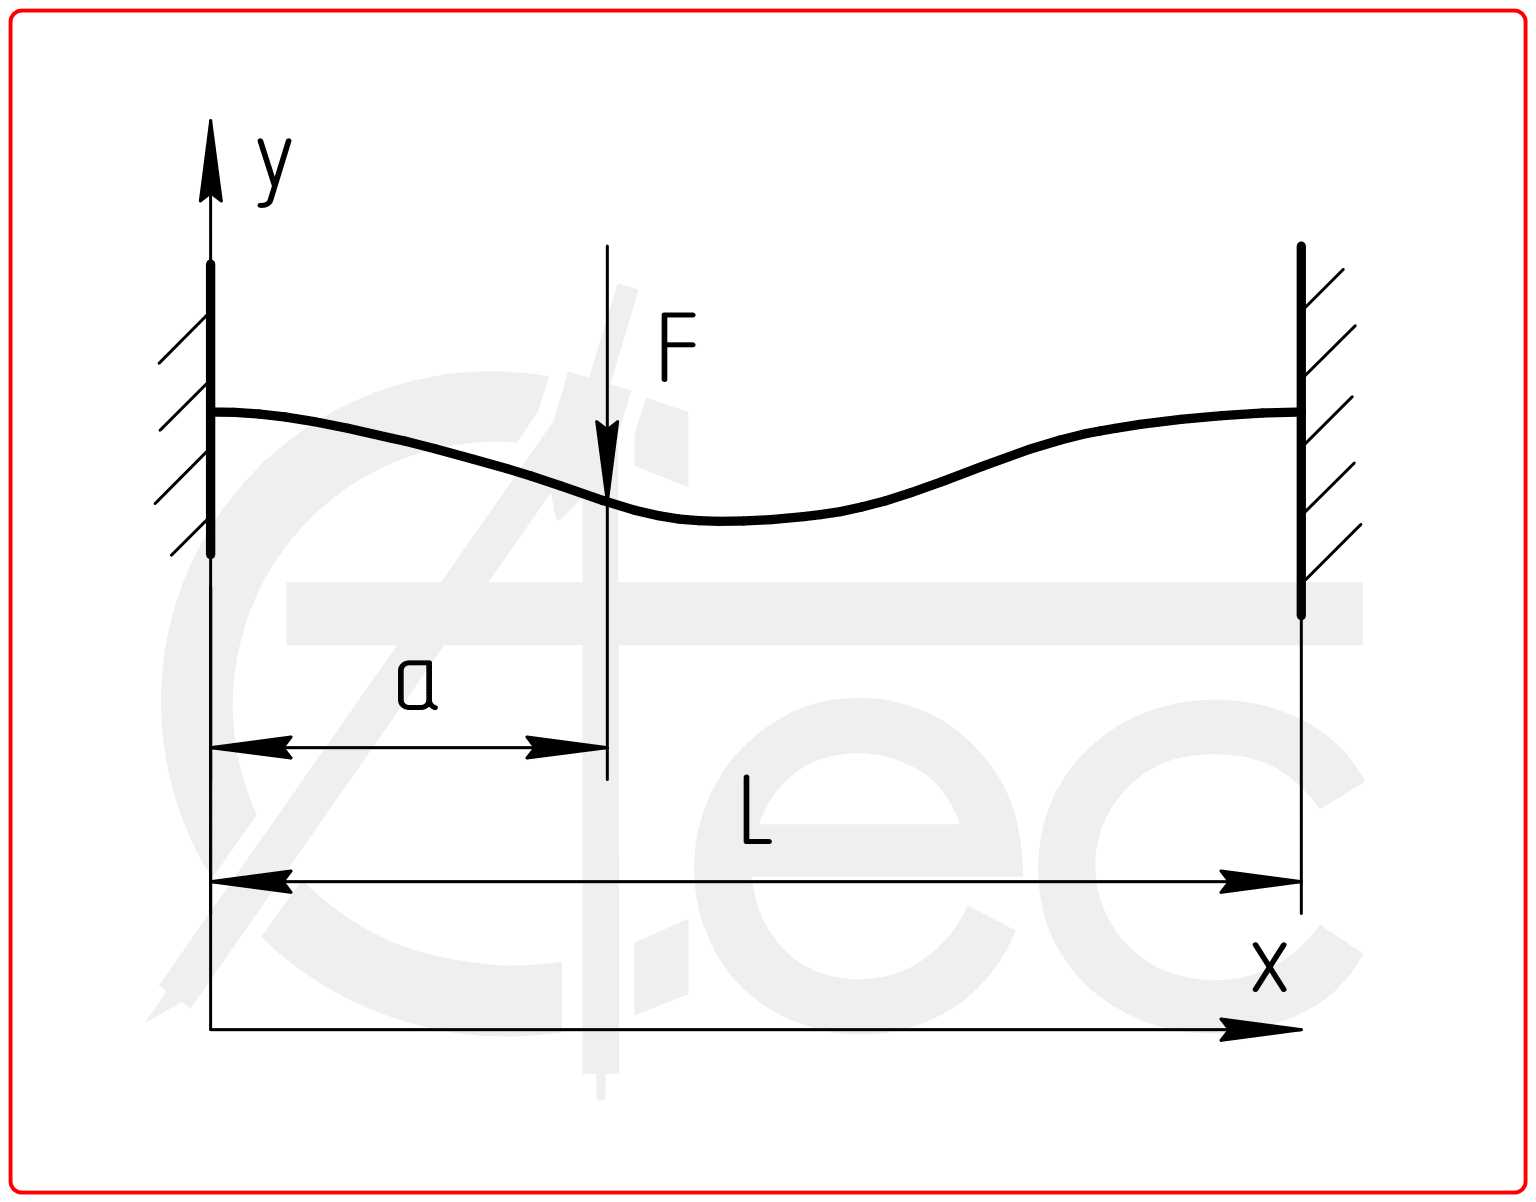 Beam with fixed ends under concentrated load